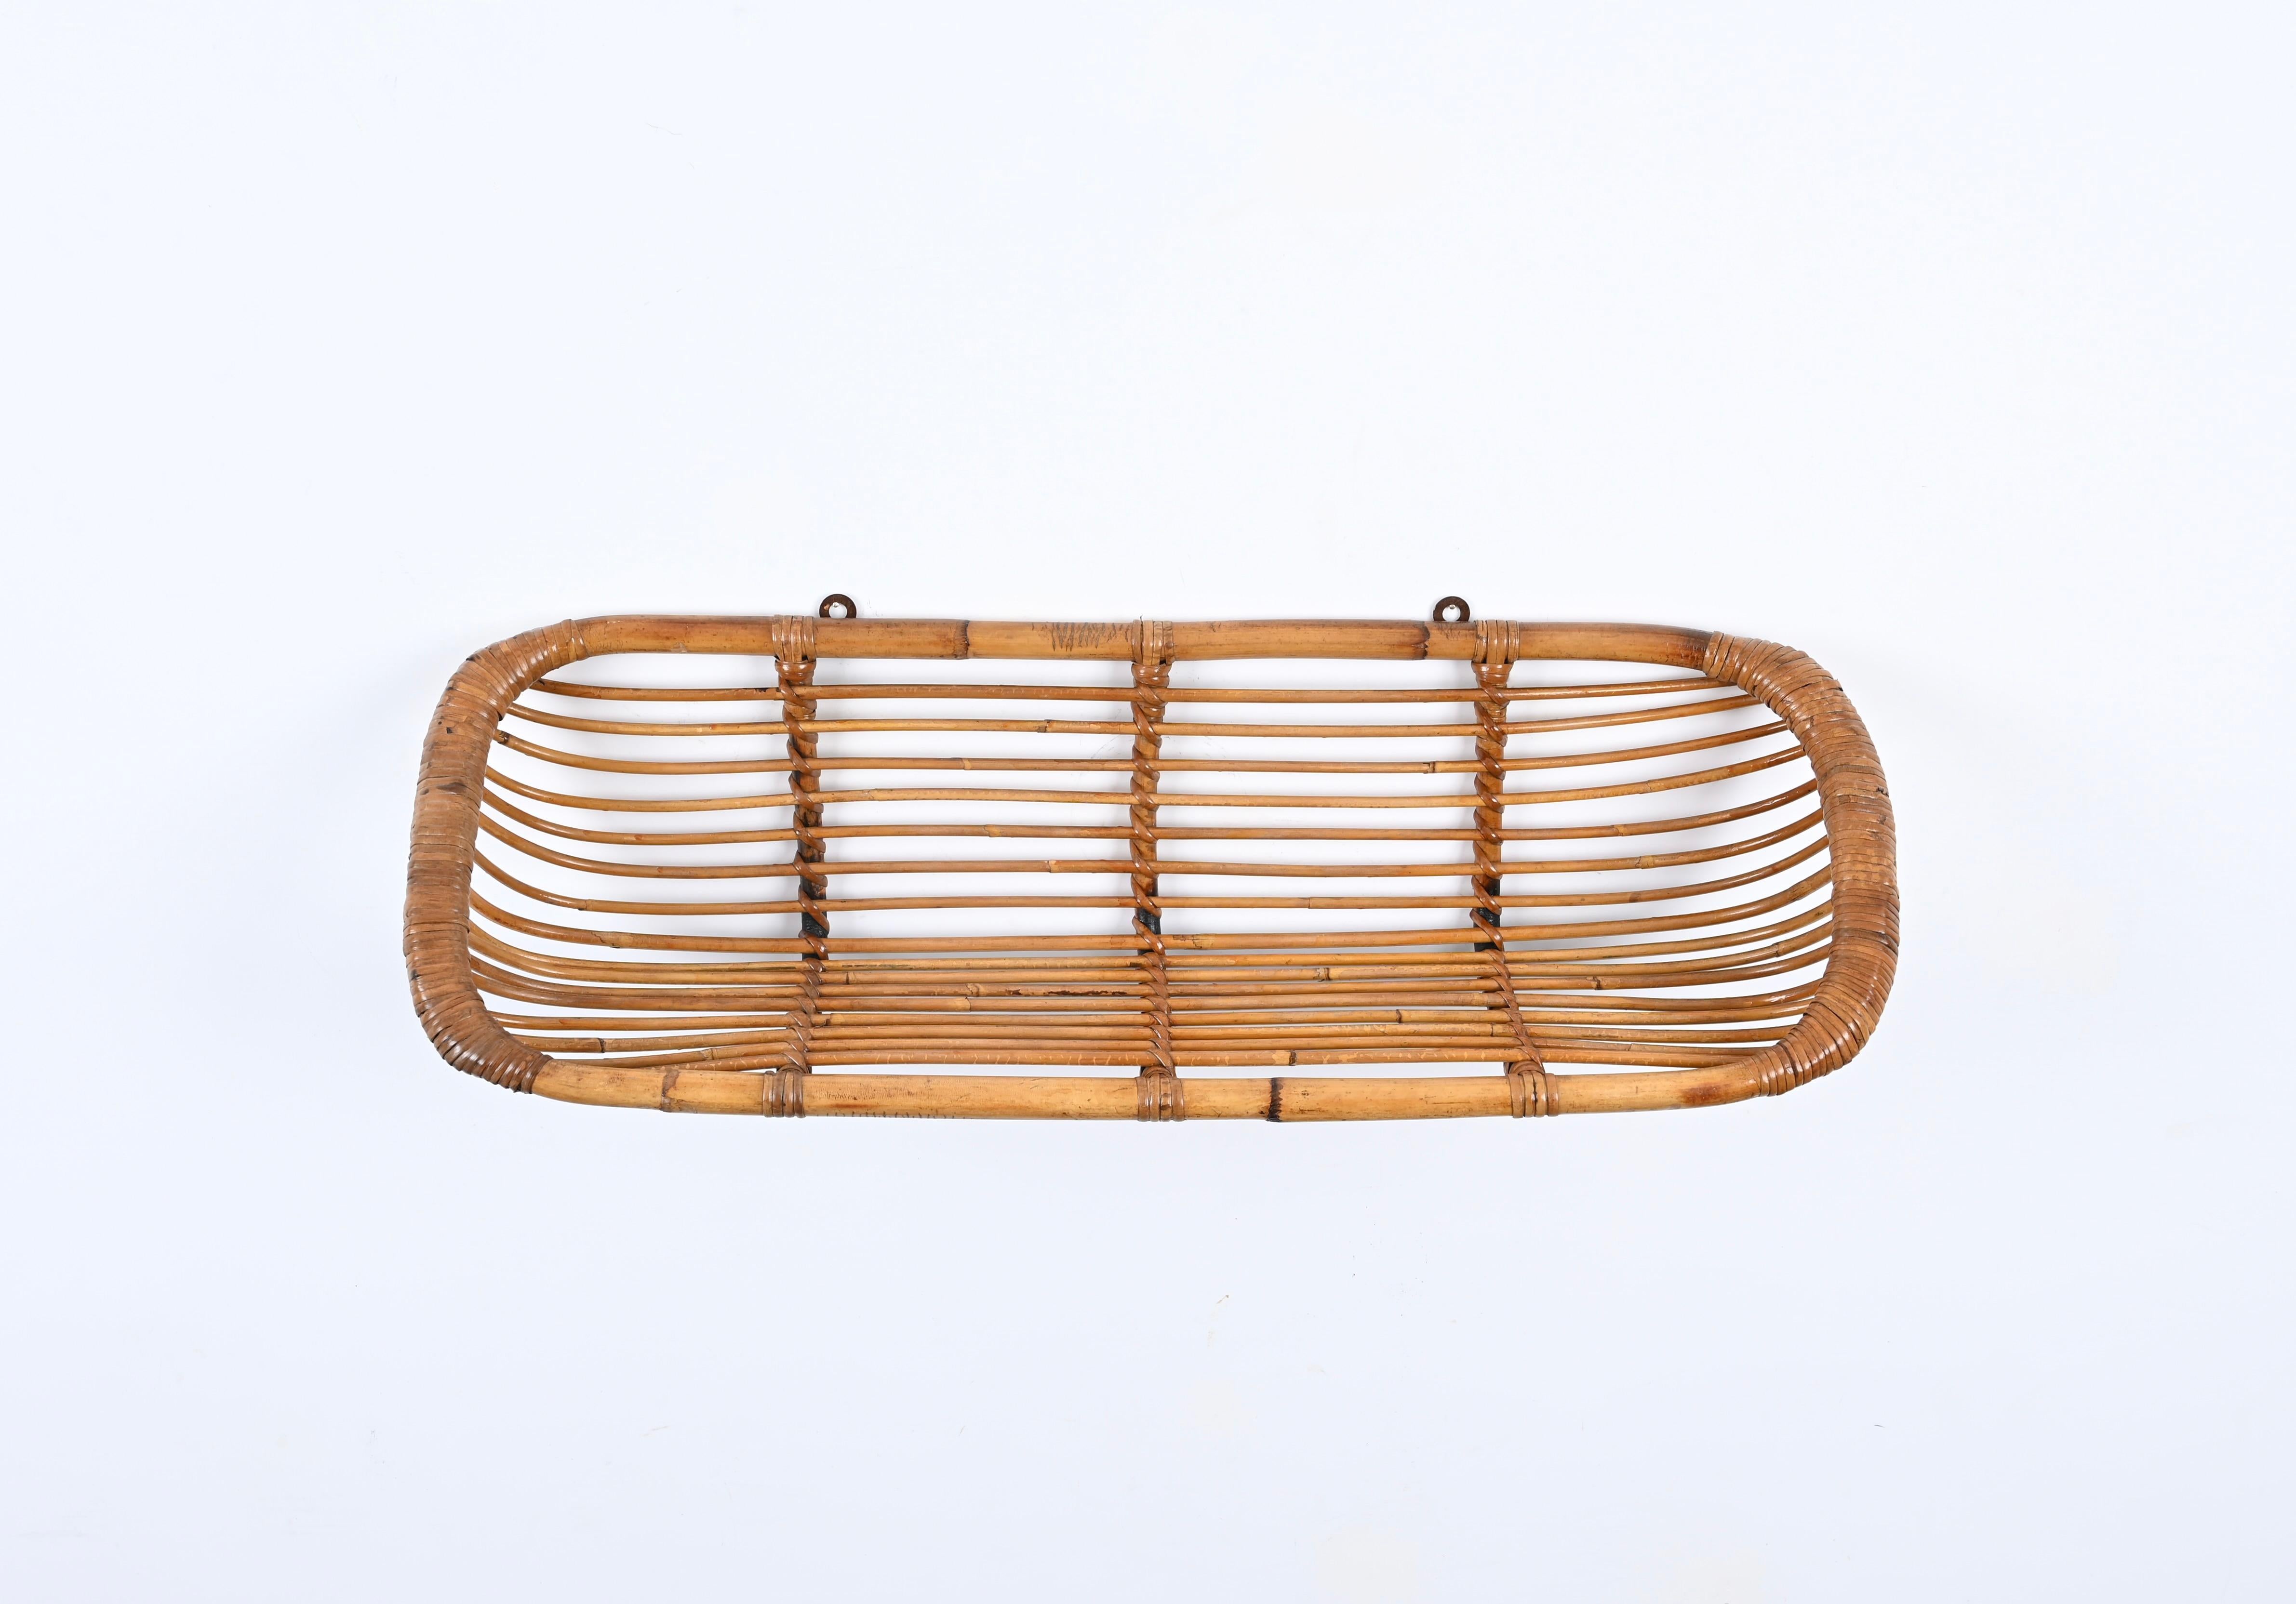  Franco Albini Mid-Century Wall Shelf in Rattan and Bamboo, Italy, 1960s For Sale 3